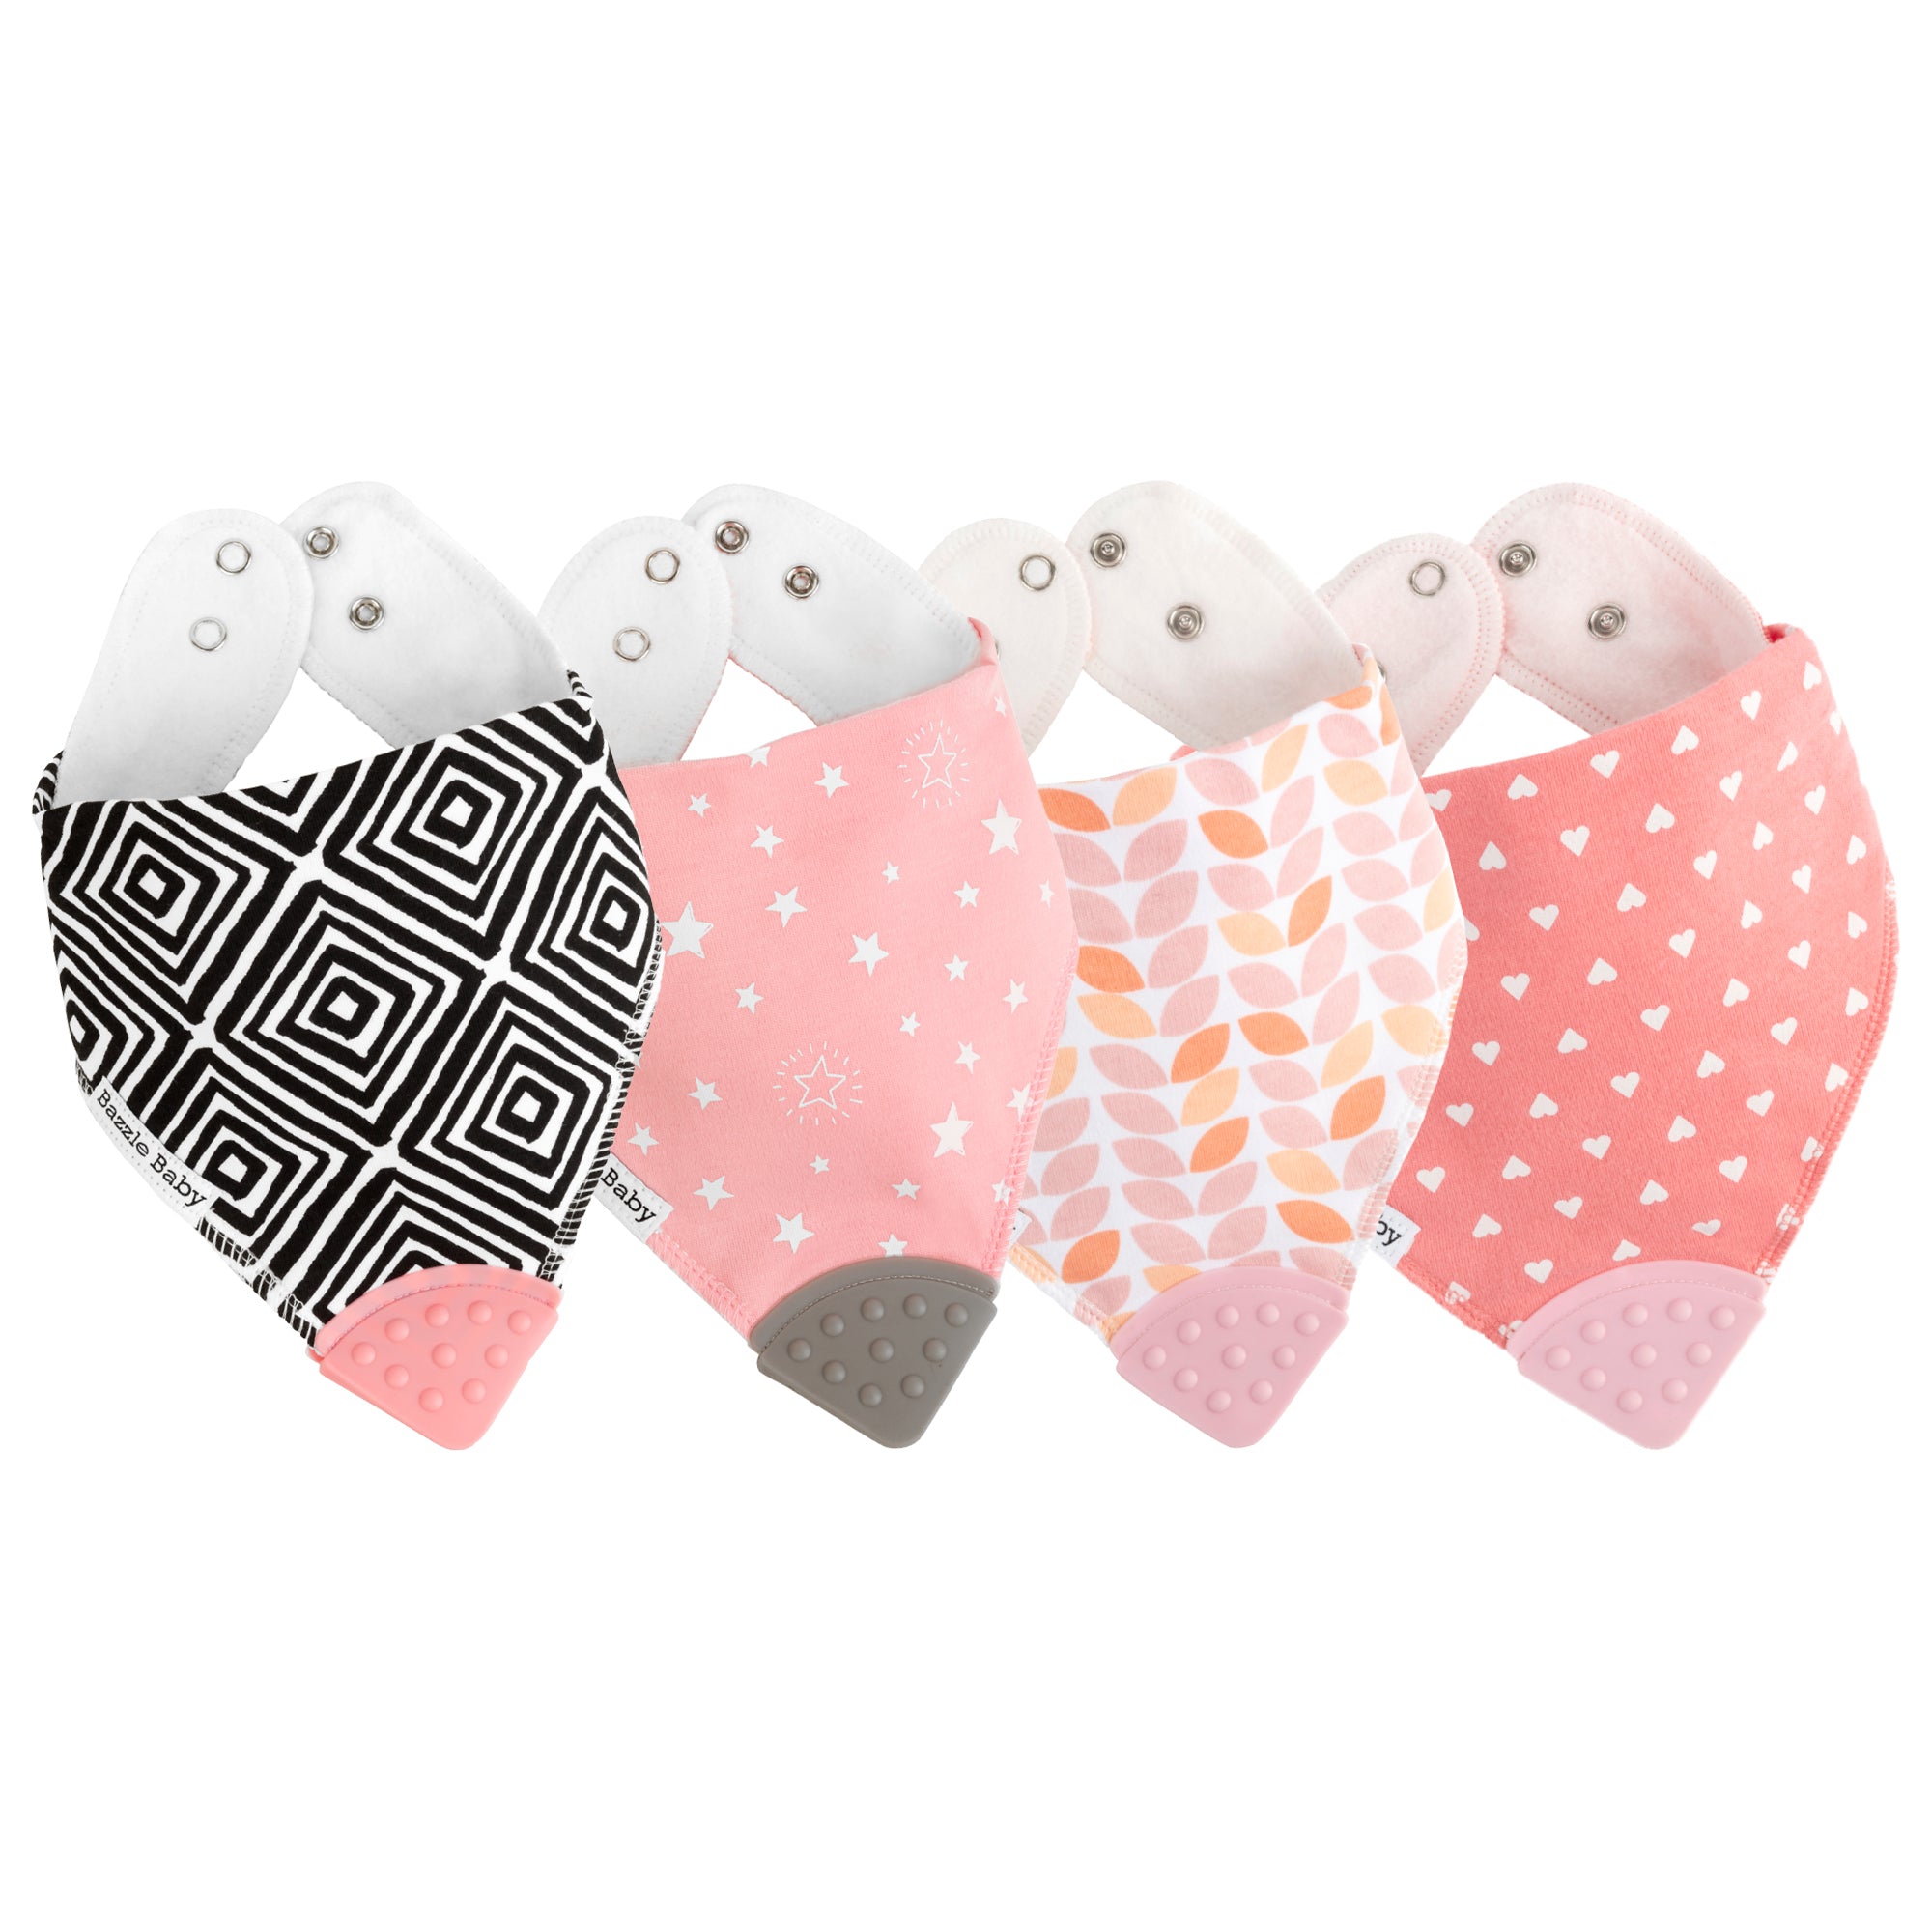 4 - Pack Baby Bandana Drool Bibs with Silicone Teether Attached - Cotton and Fleece 